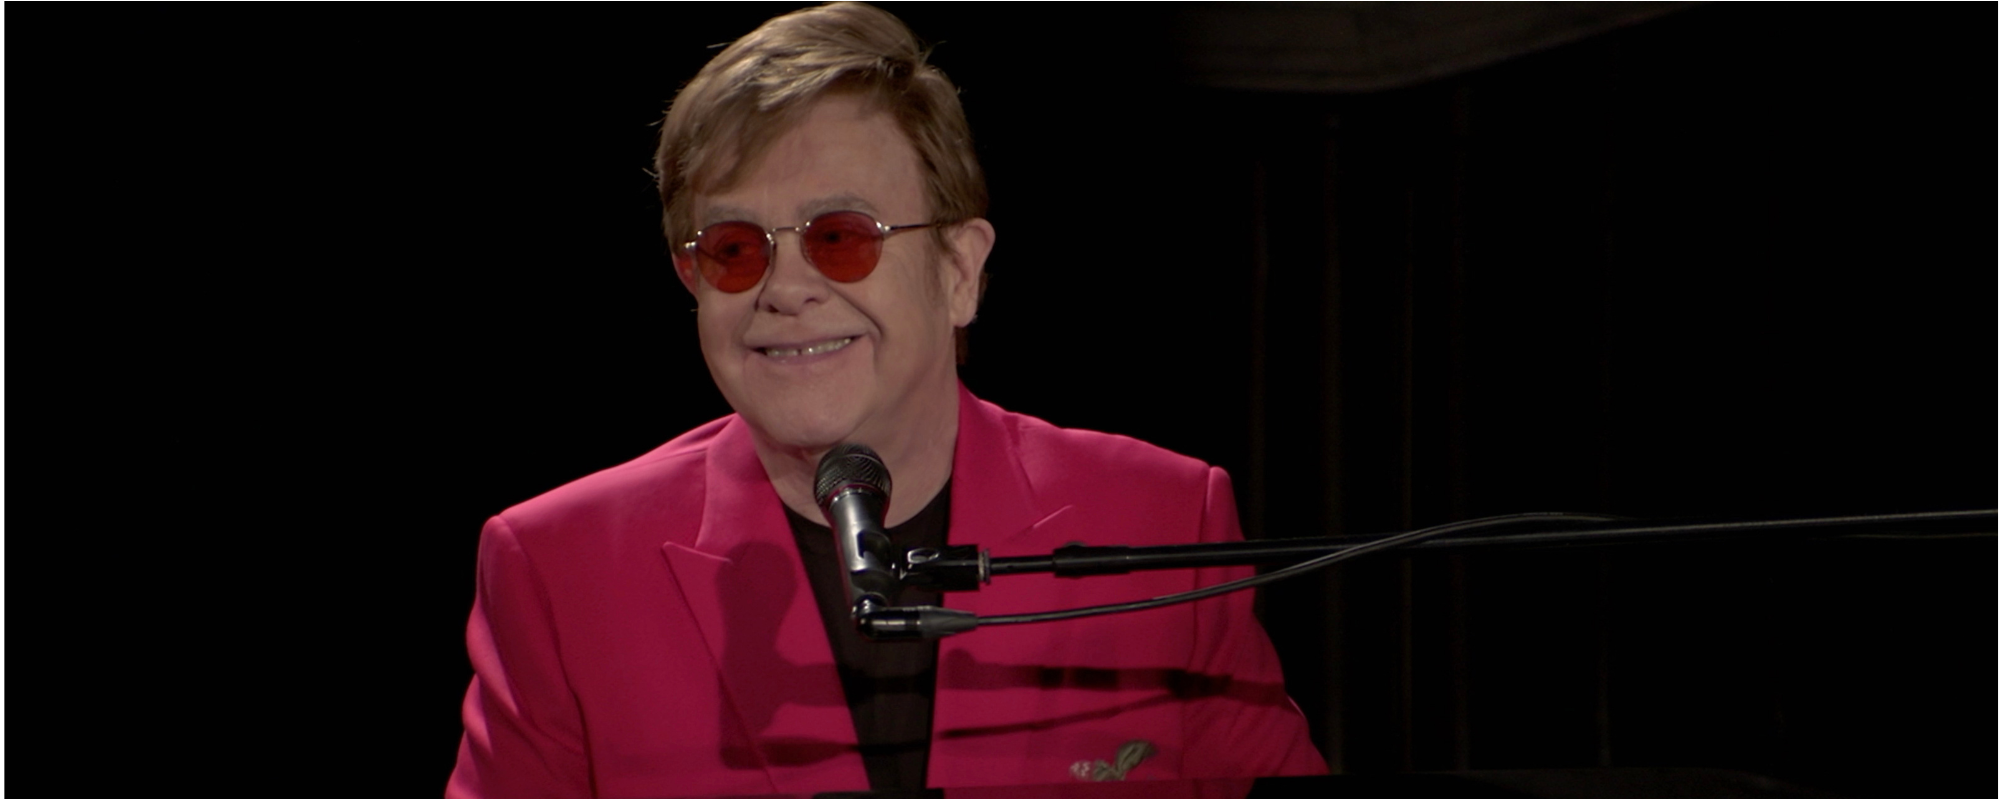 Elton John Releases ‘Step into Christmas’ Digital EP; Honored with U.K. Theater Award